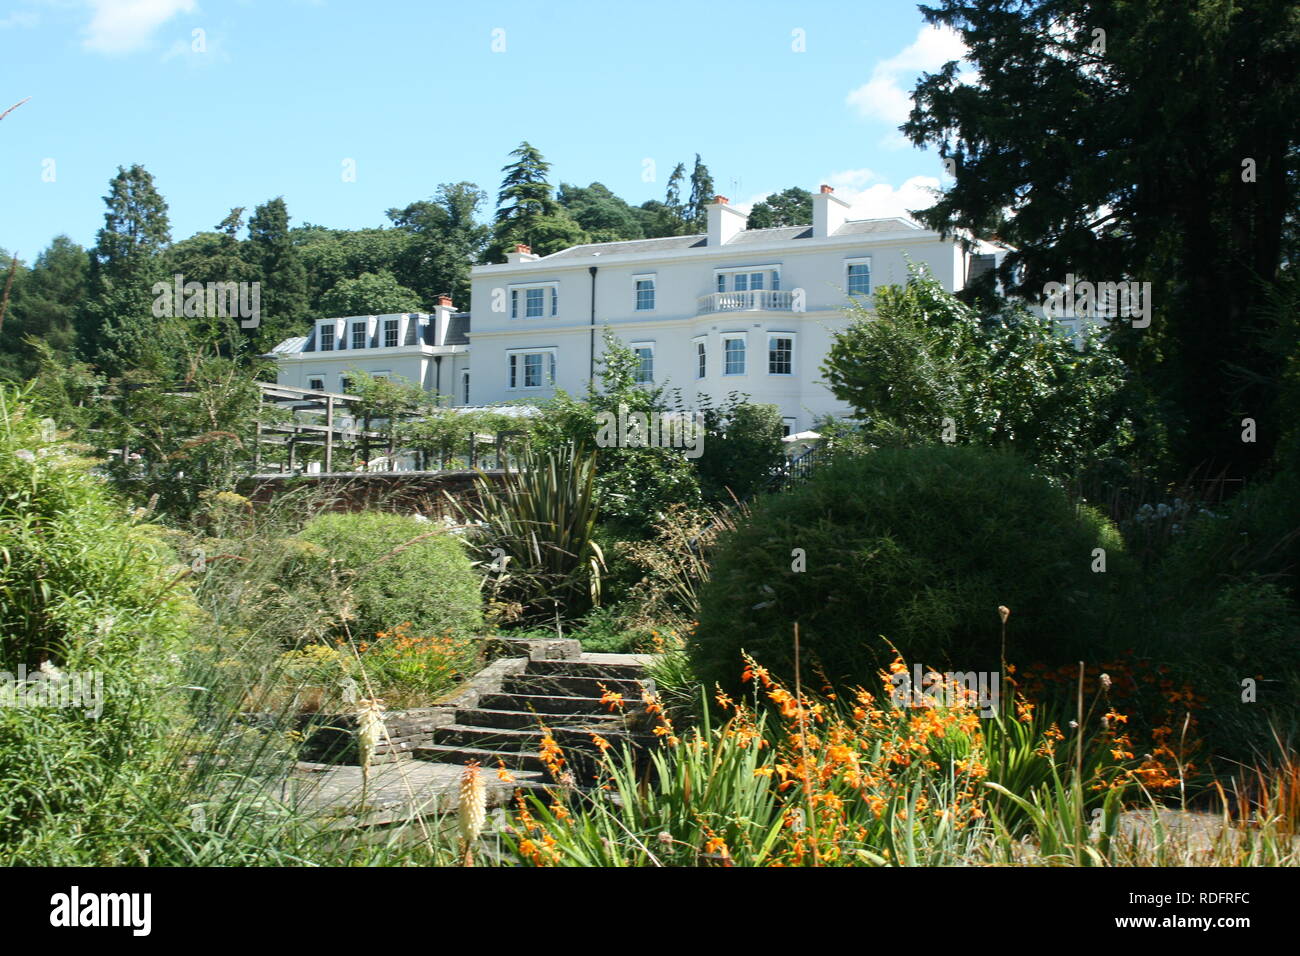 Views of Coworth Park Hotel and surrounding gounds Stock Photo